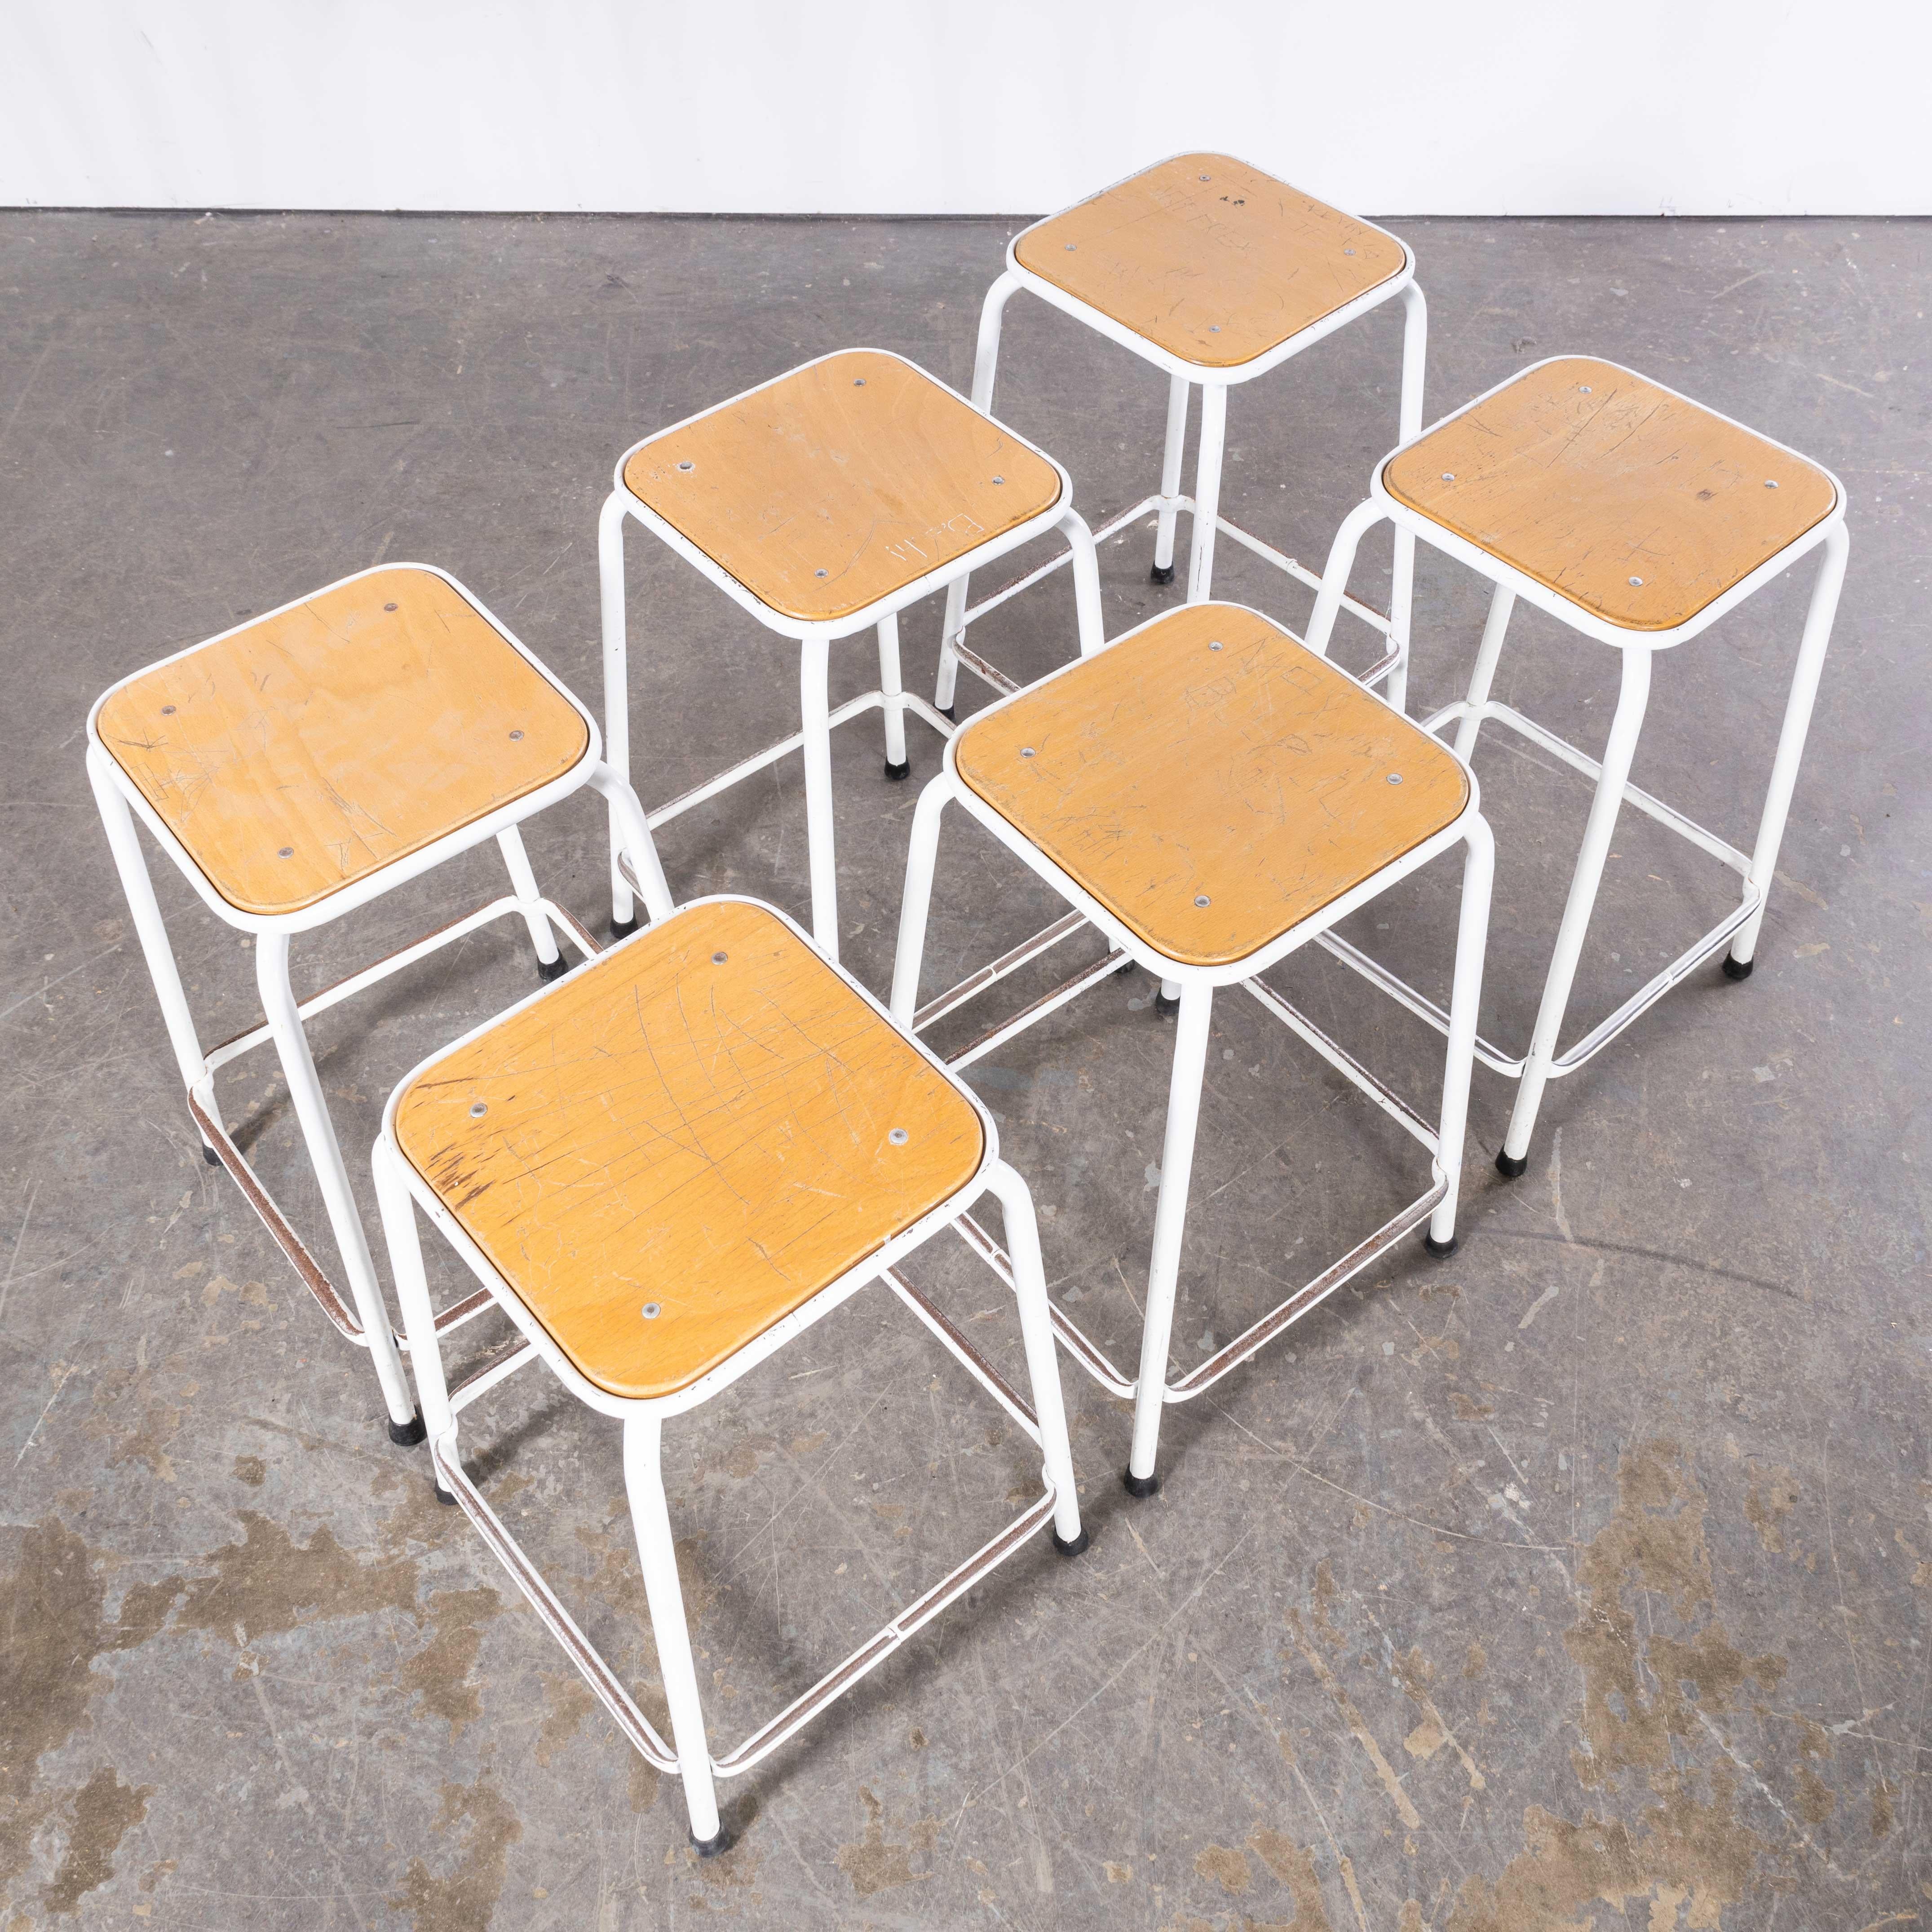 1970’s French White Laboratory Stools – Set Of Six
1970’s French White Laboratory Stools – Set Of Six. Good honest lab stools, heavy steel frames with solid heavy birch ply seats. We clean them and check all fixings, they are good to go. Seat Height